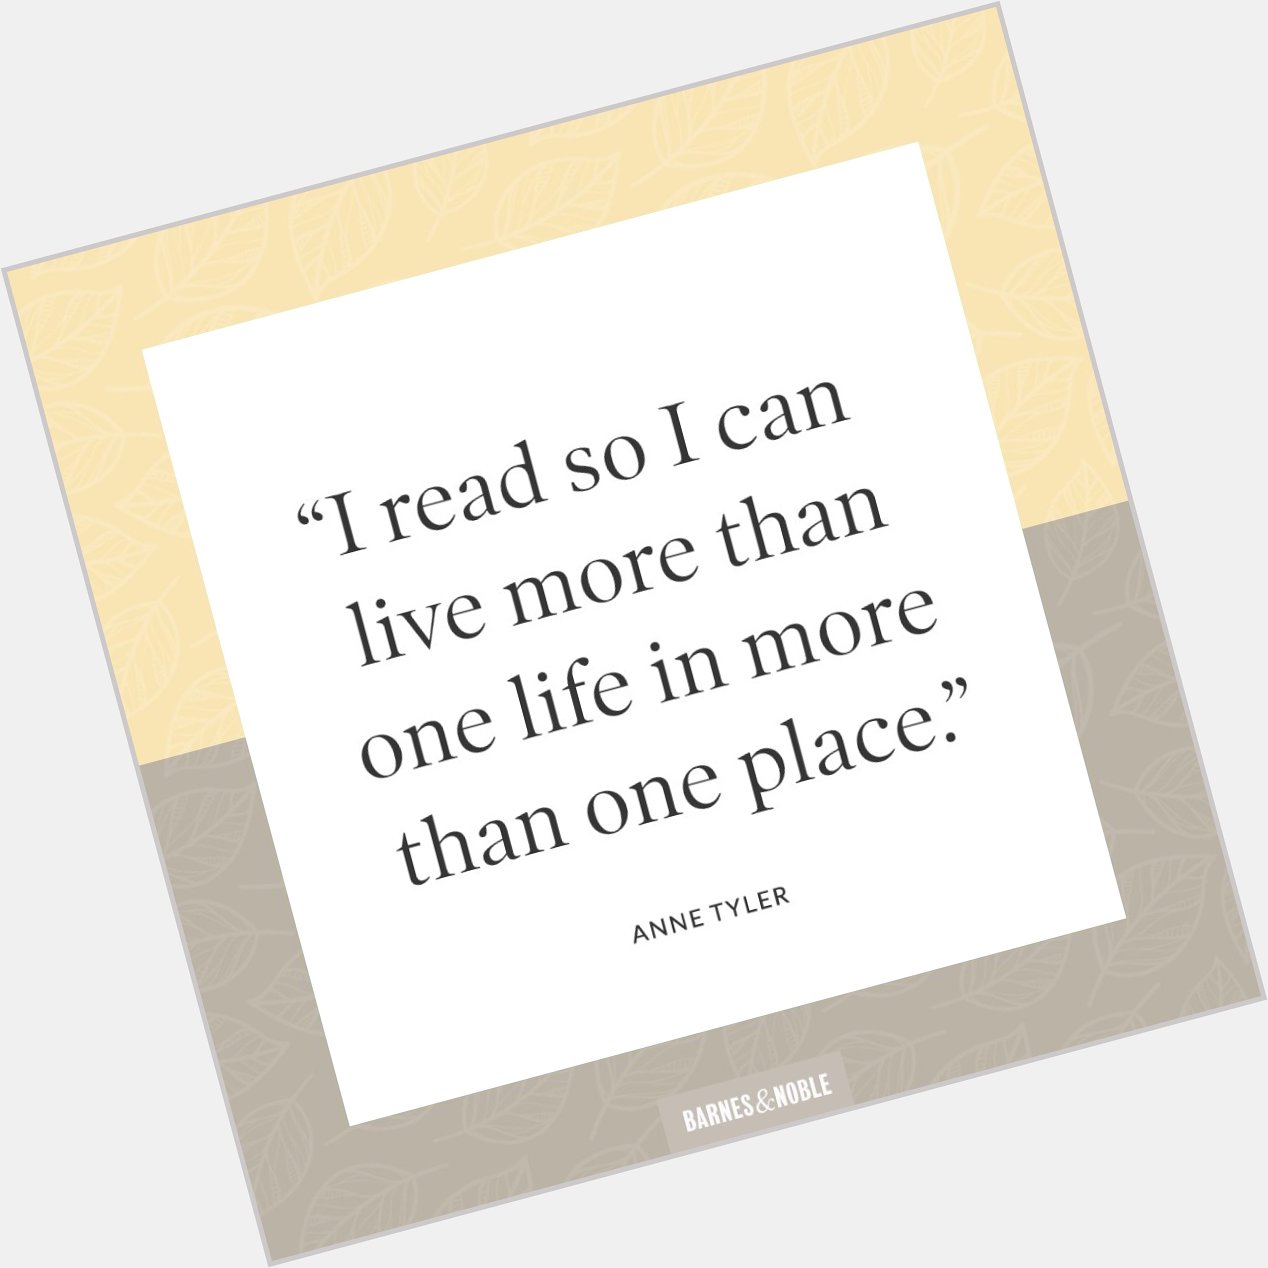 Happy birthday, Anne Tyler! Reply & let us know why you read. 